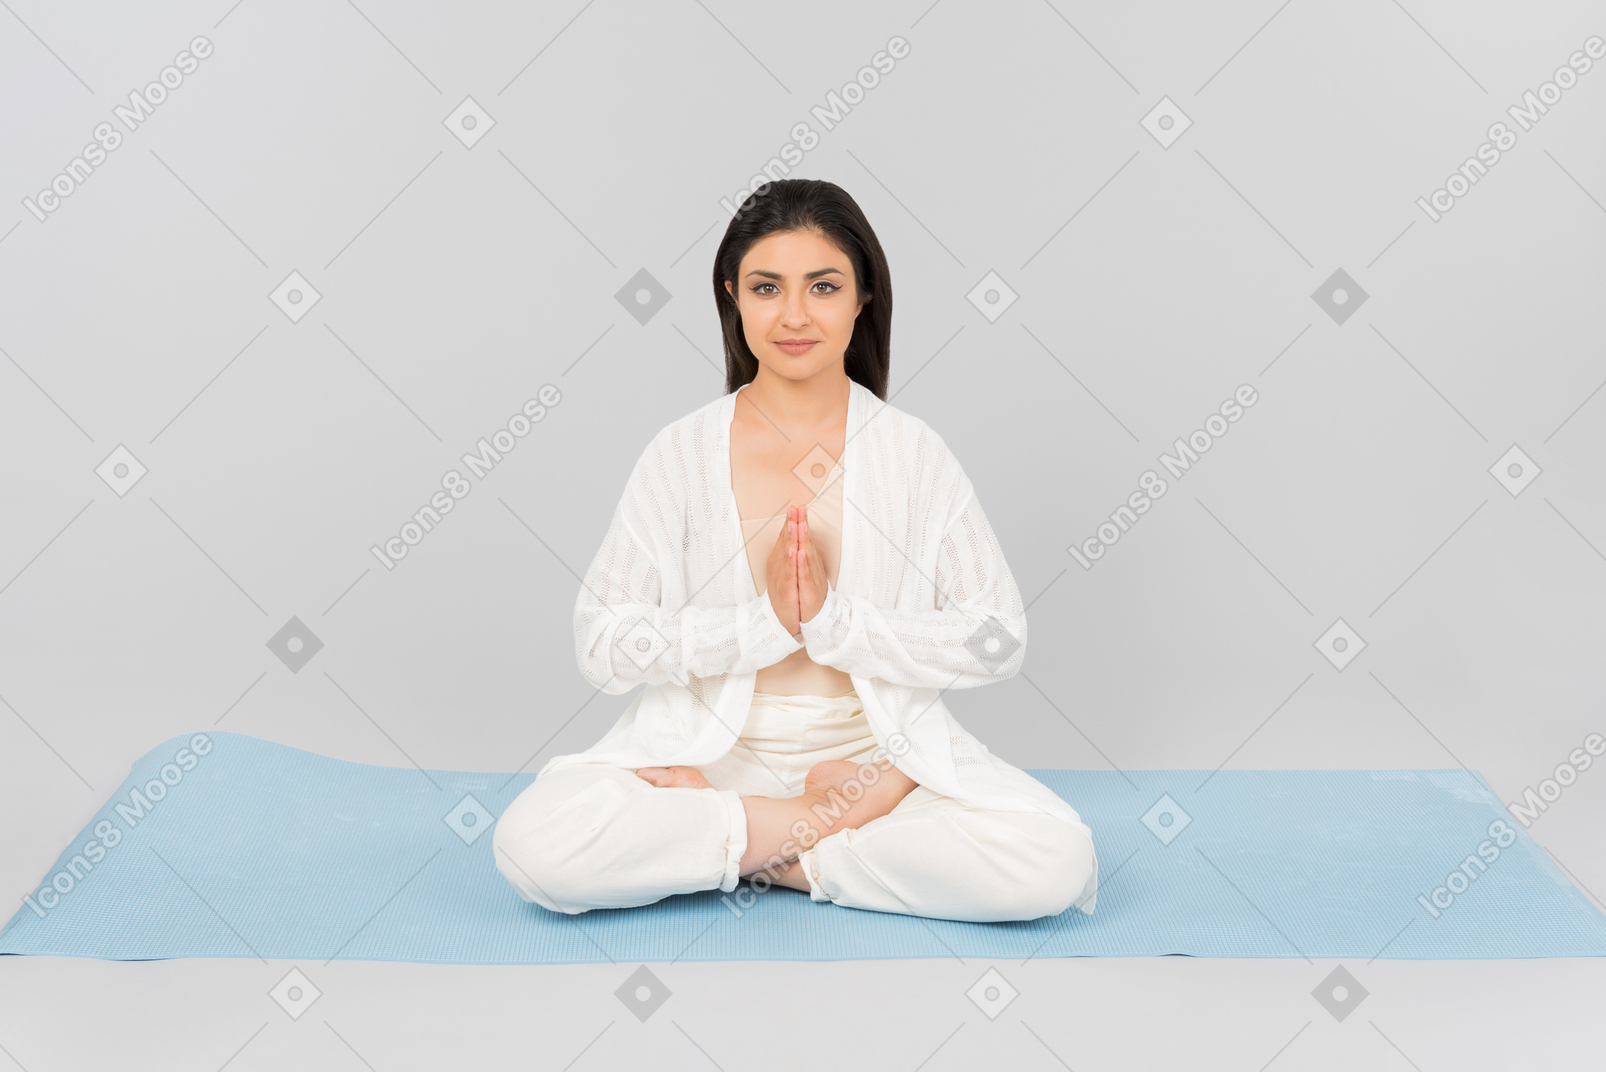 Young indian woman with hands folded and legs crossed sitting on yoga mat